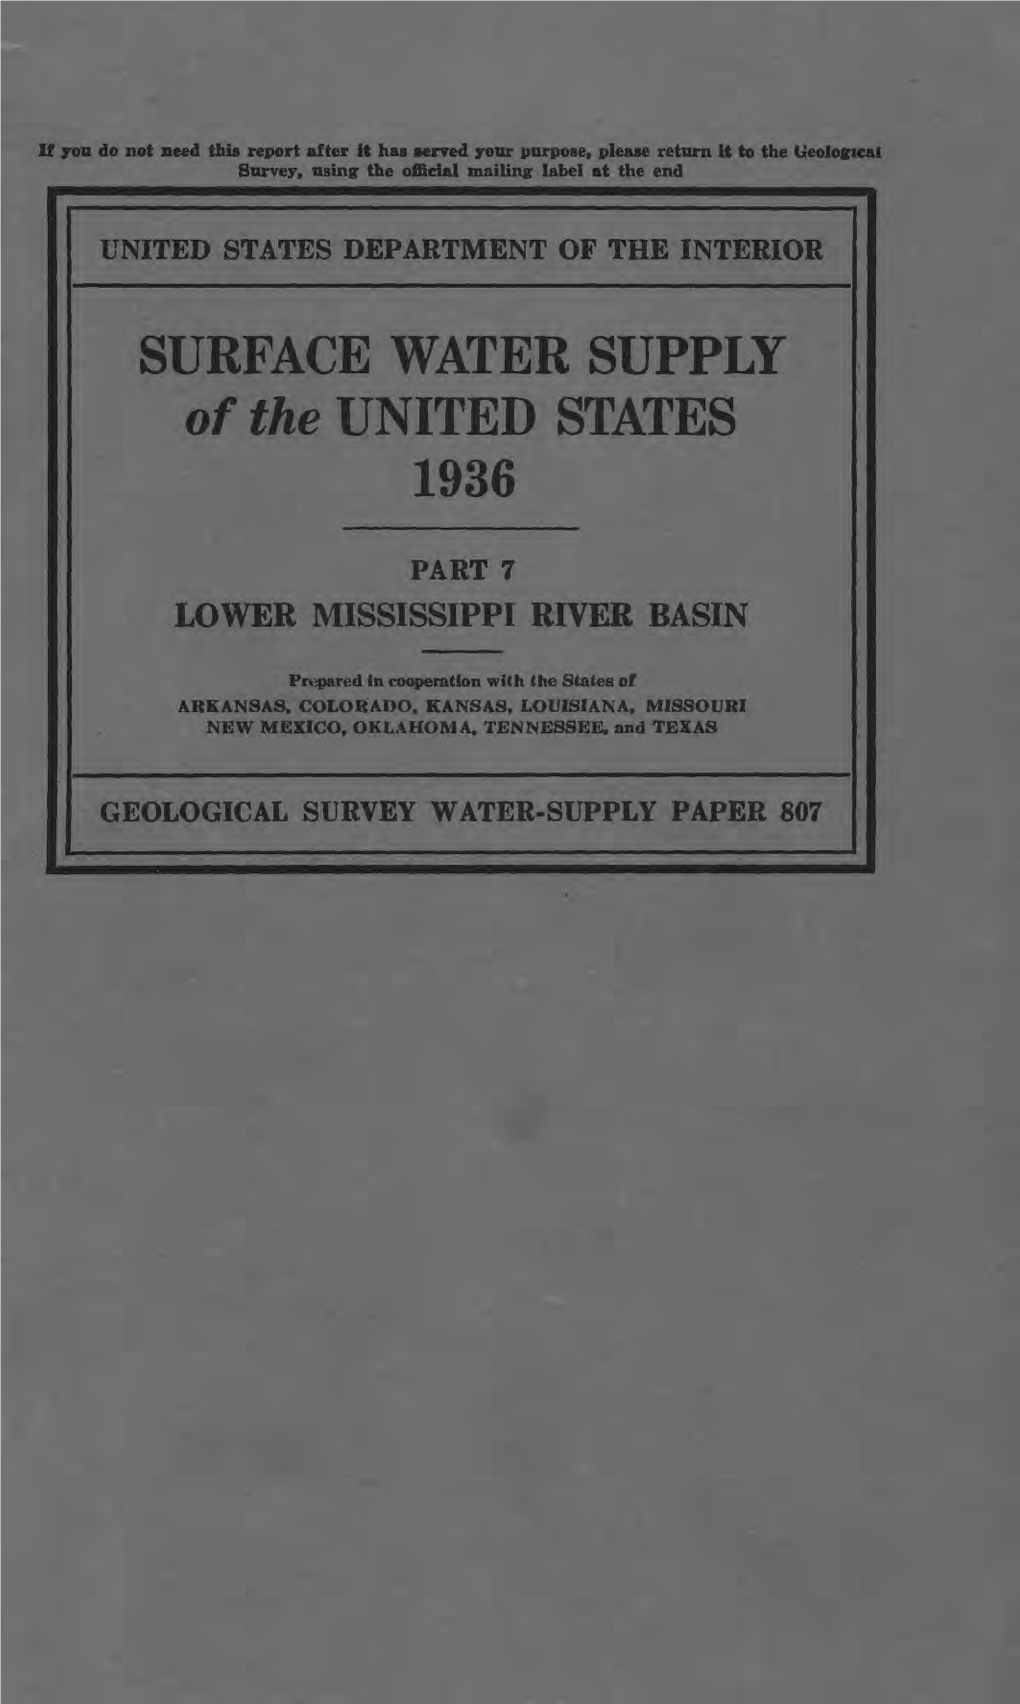 SURFACE WATER SUPPLY of the UNITED STATES 1936